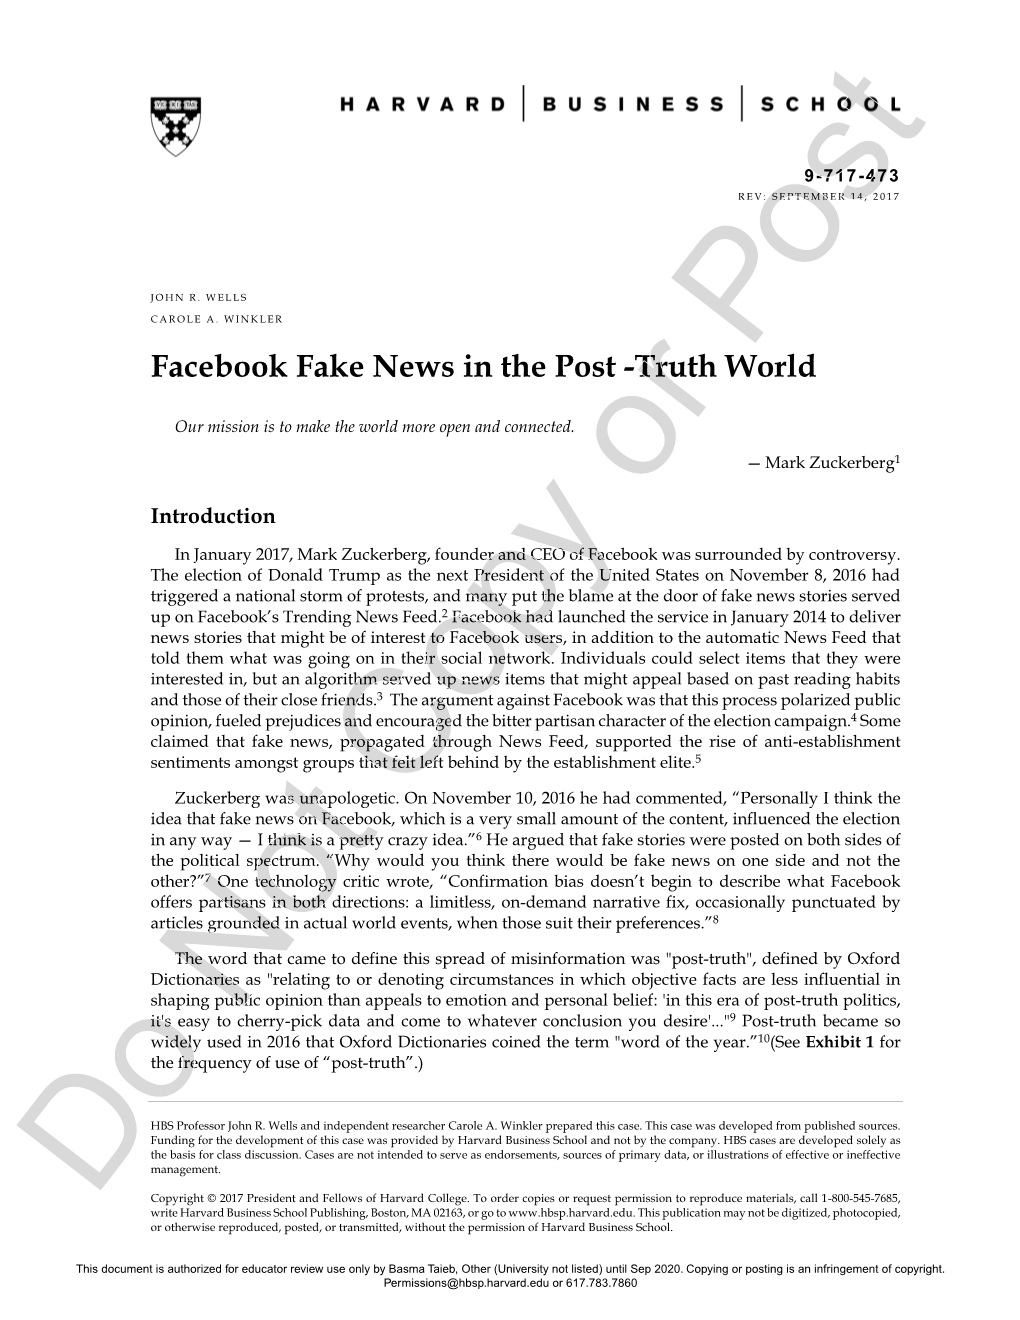 Facebook Fake News in the Post -Truth World